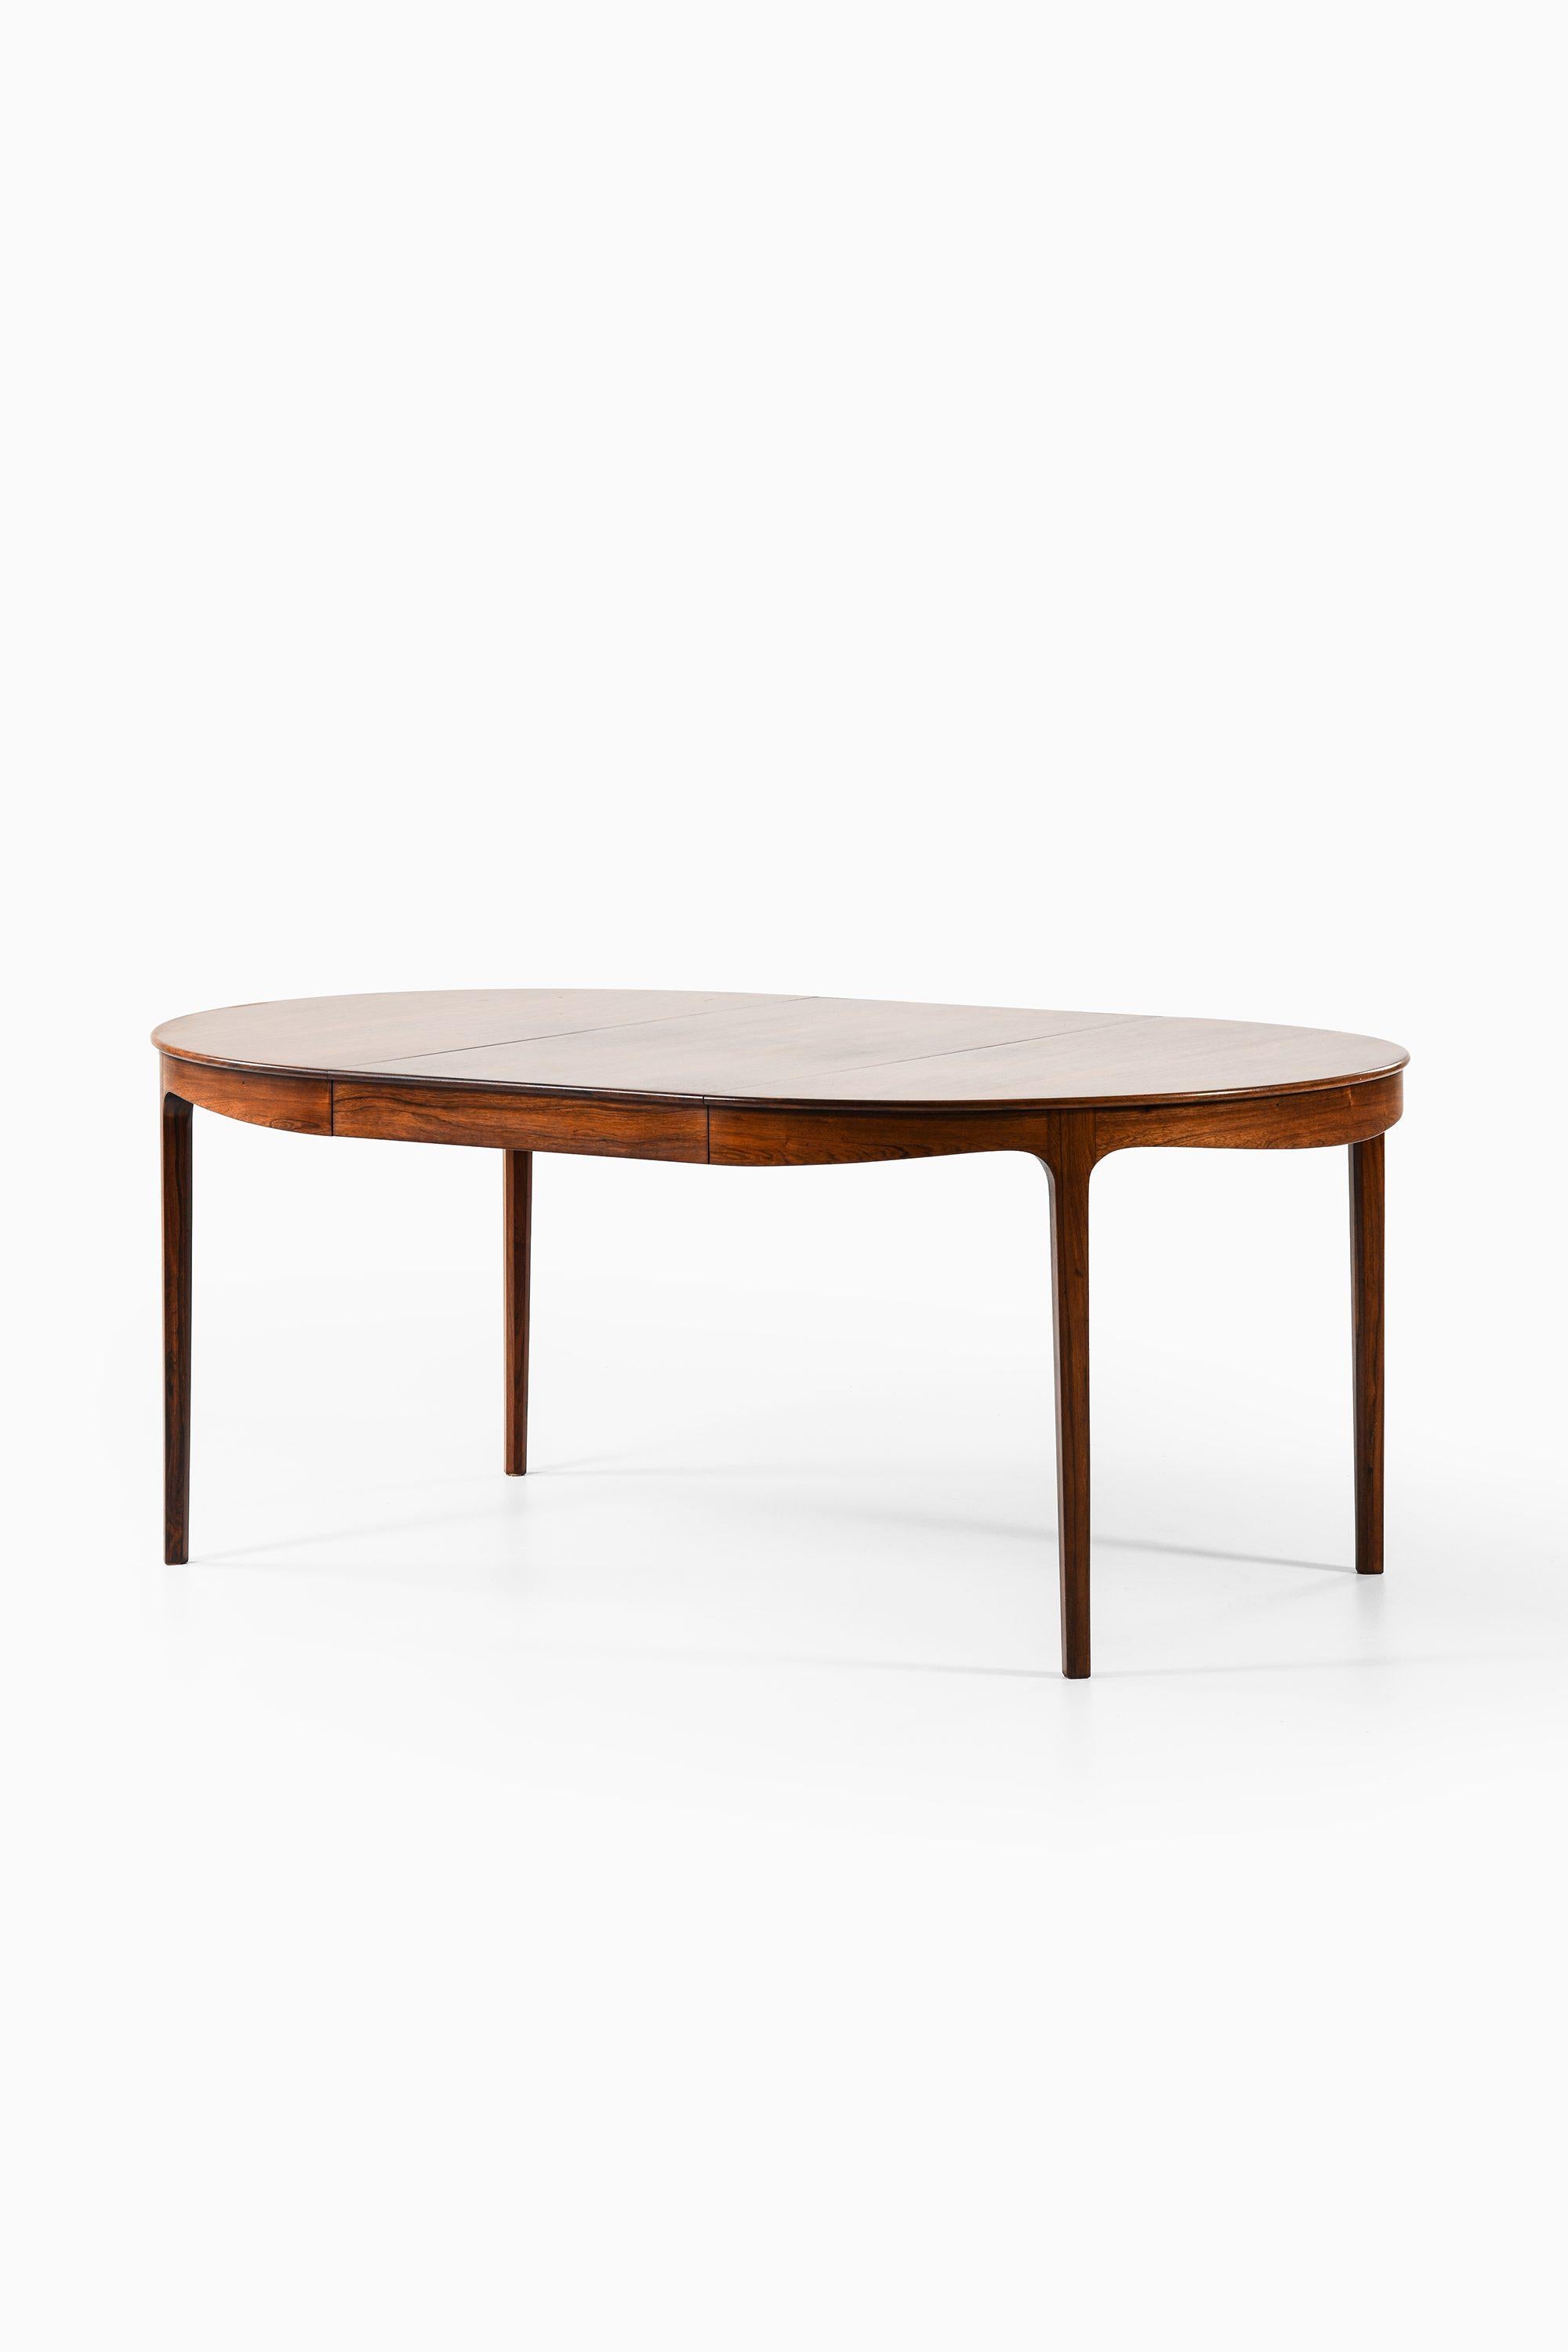 Danish Dining Table in Rosewood by Ole Wanscher, 1945 For Sale